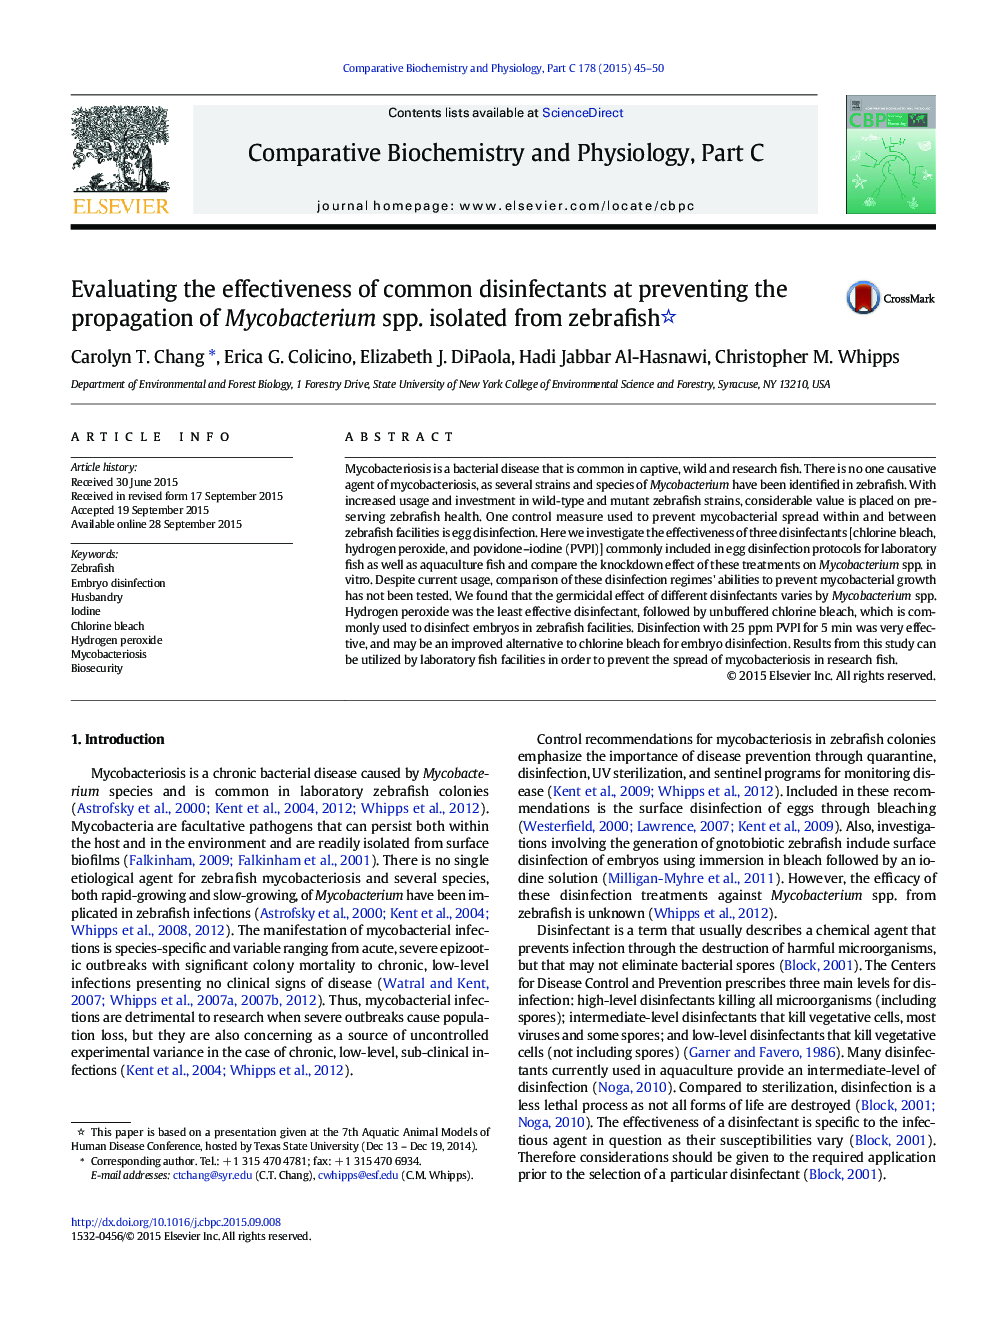 Evaluating the effectiveness of common disinfectants at preventing the propagation of Mycobacterium spp. isolated from zebrafish 